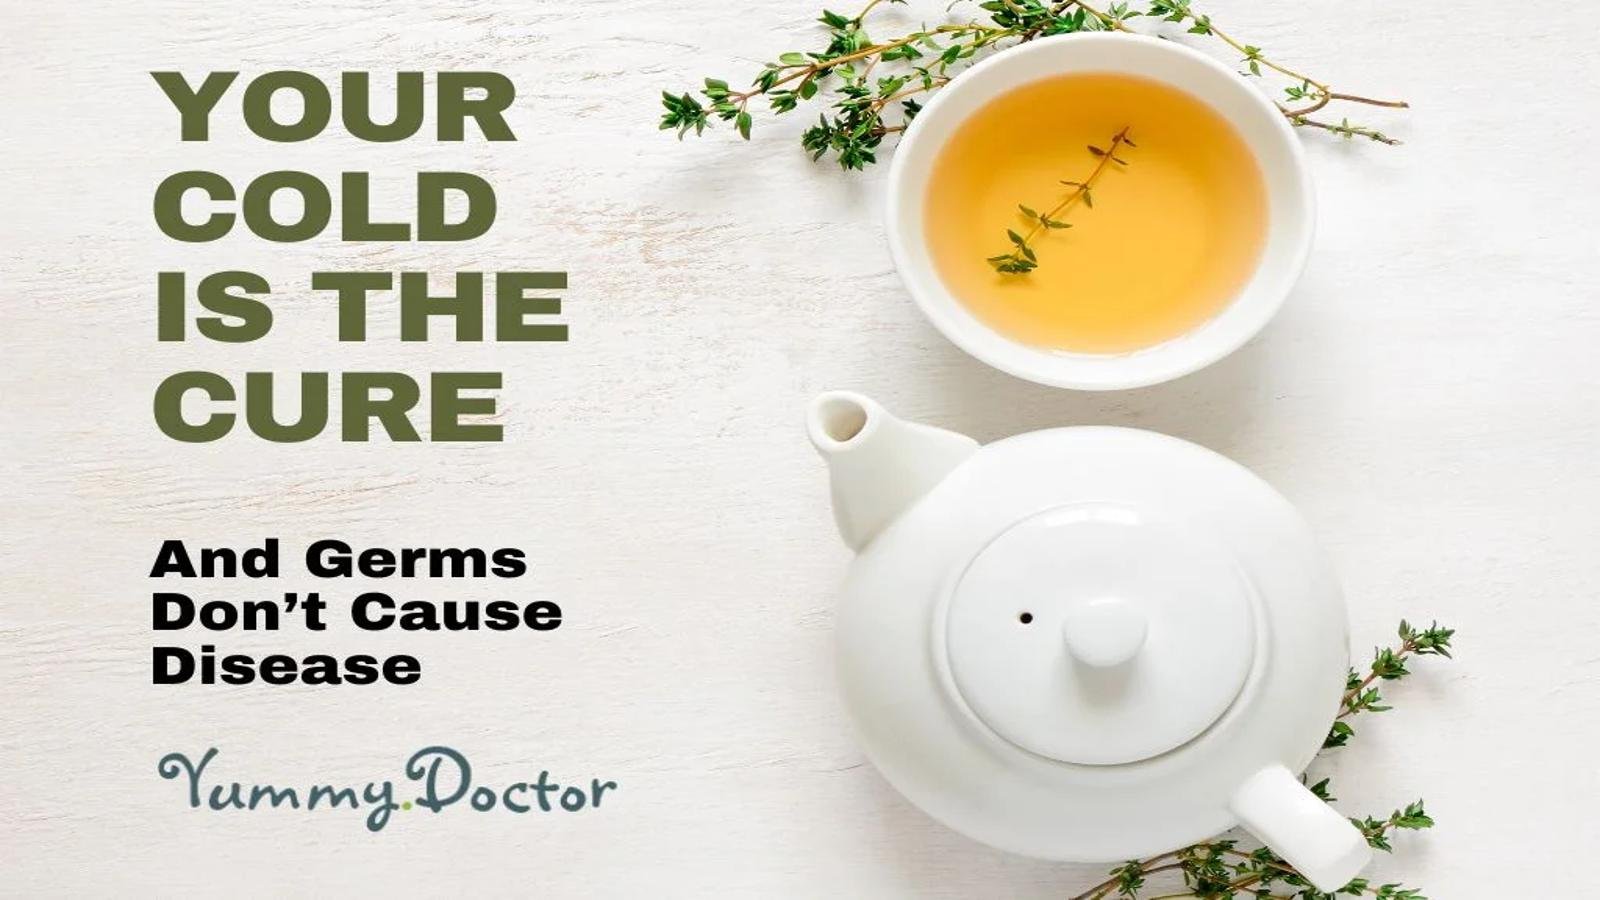 Yummy Doctor Holistic Health Education - Blog - Your Cold is the Cure